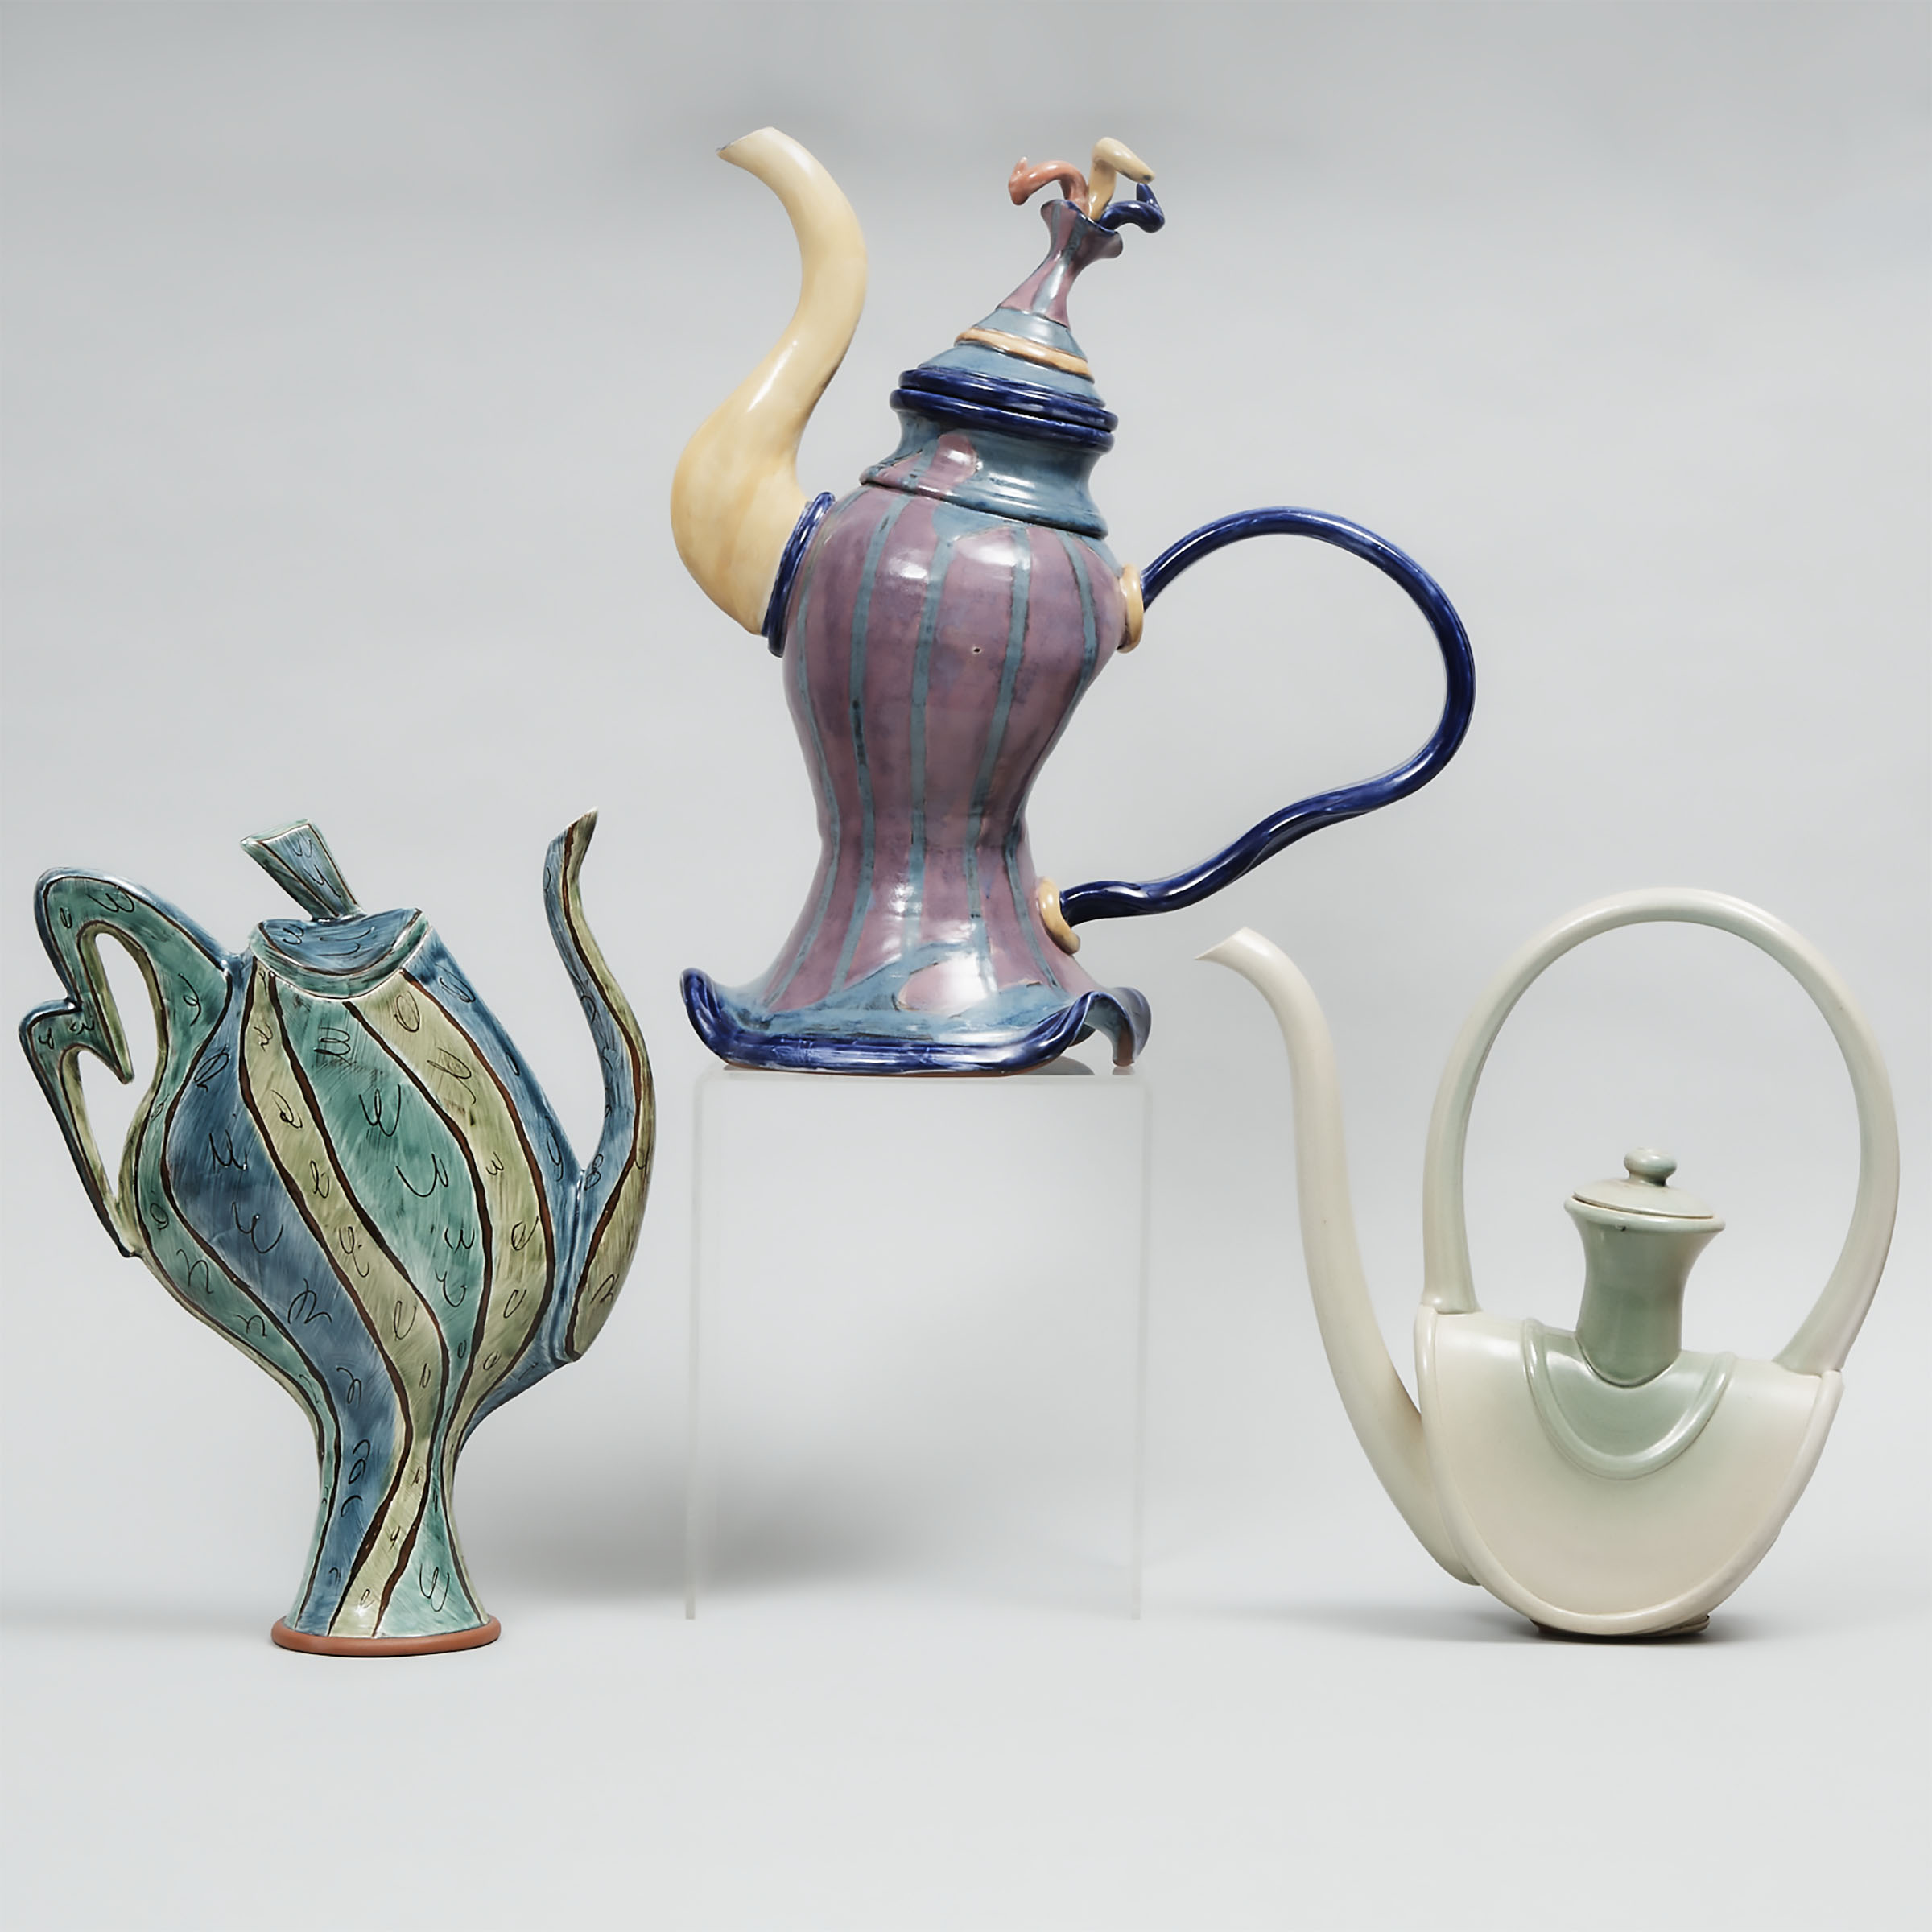 Three Large Studio Pottery Teapots, late 20th/early 21st century